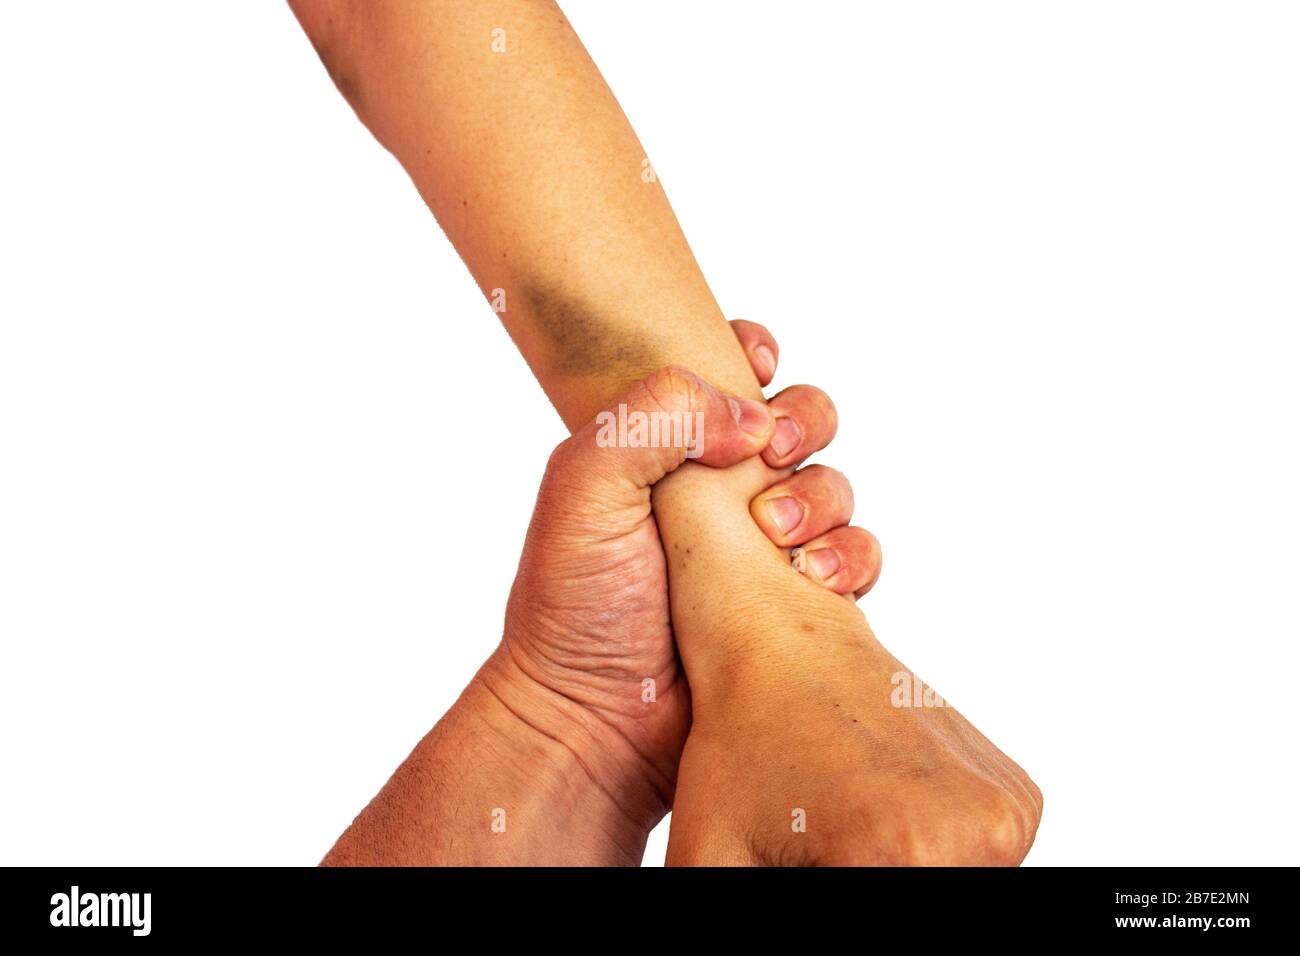 The man brutally grabbed the girl's hand and bruises appeared. Stock Photo